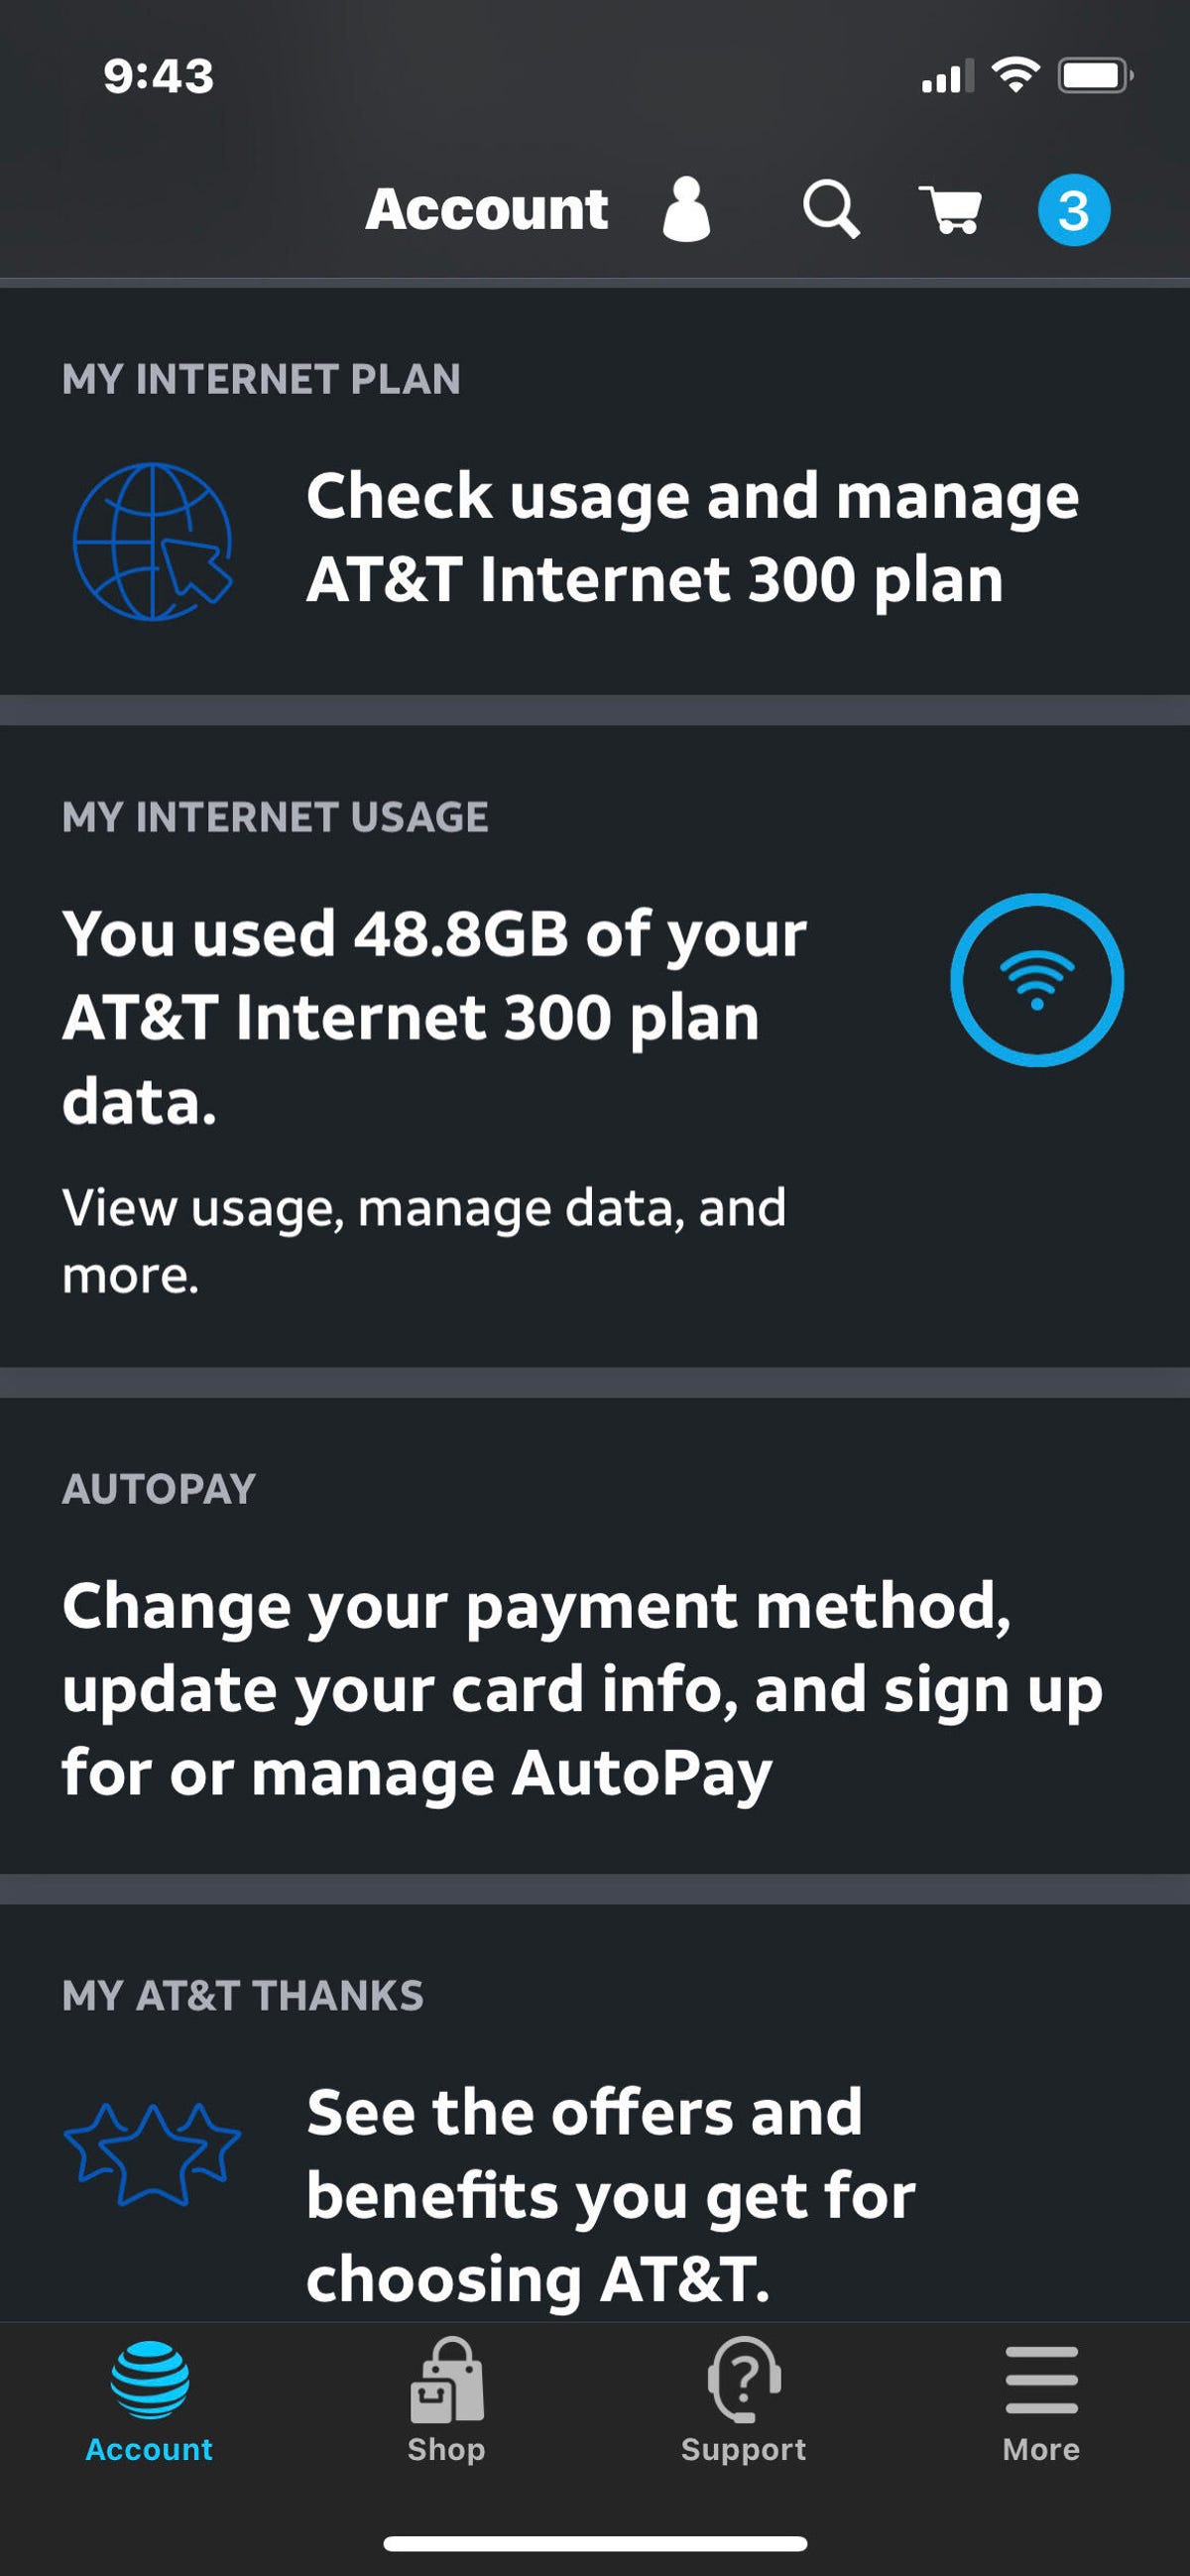 How To Limit Internet Usage Per Device How to Manage Your Home Internet Plan's Data Cap Without Paying More - CNET